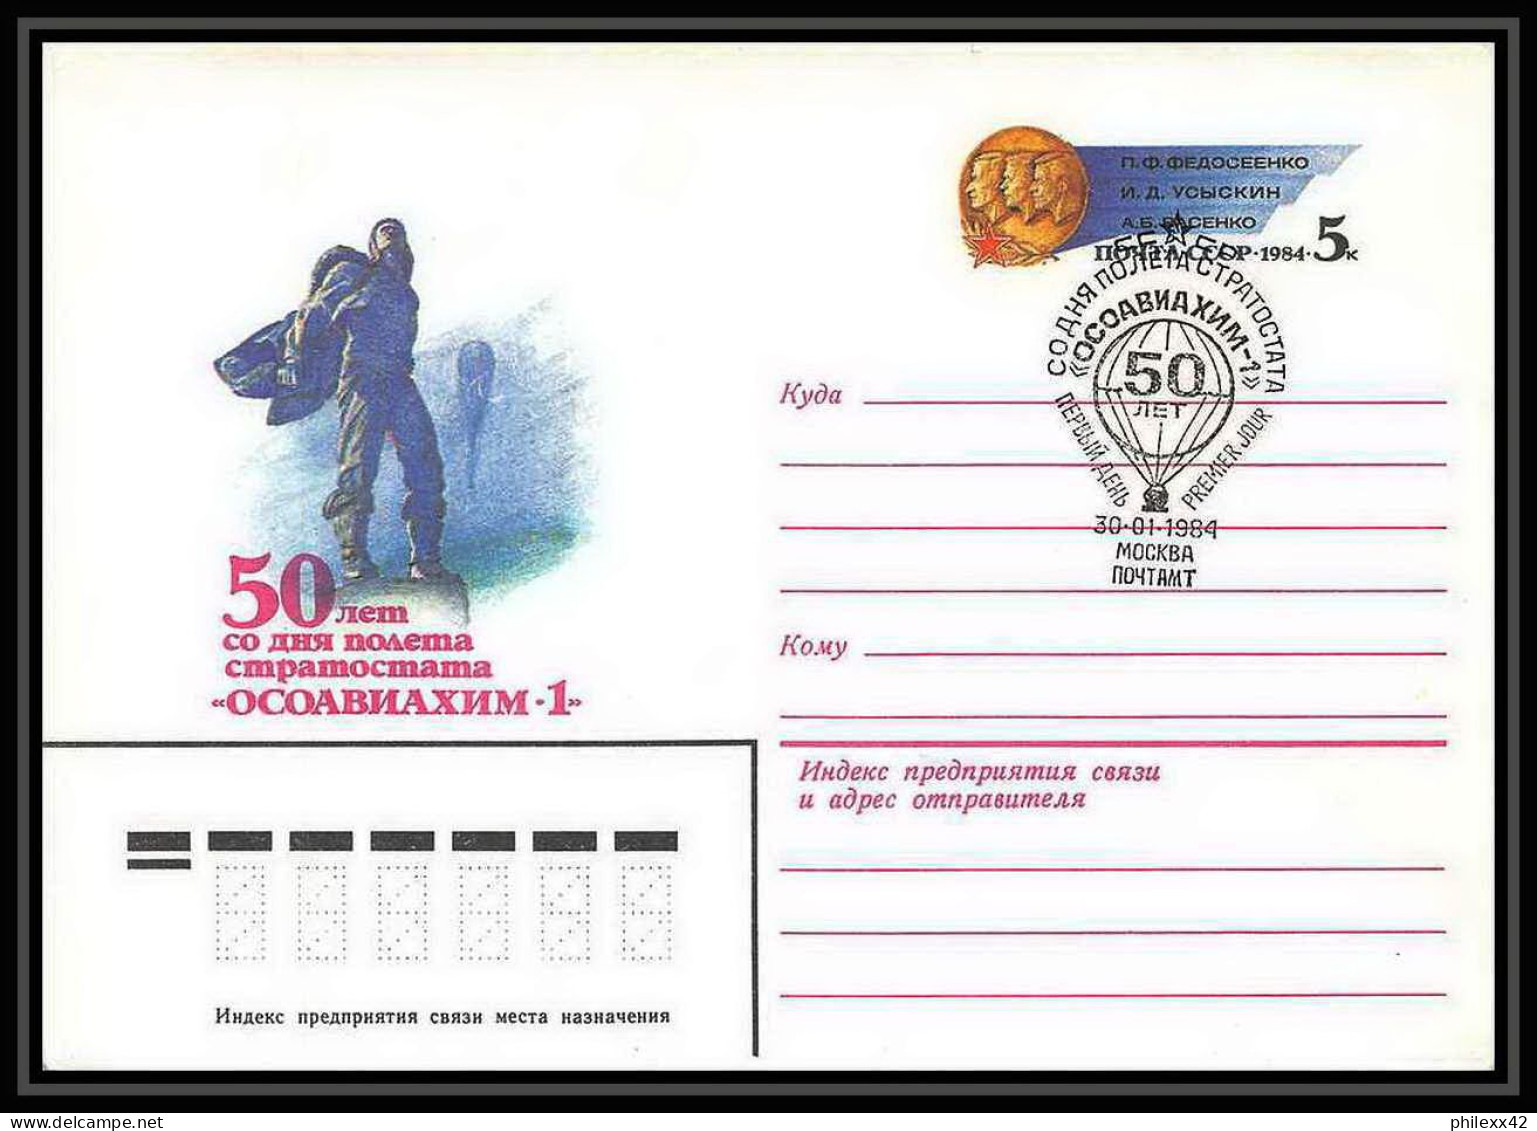 9115/ Espace (space Raumfahrt) Entier Postal (Stamped Stationery) 30/1/1984 (Russia Urss USSR) - Russia & USSR